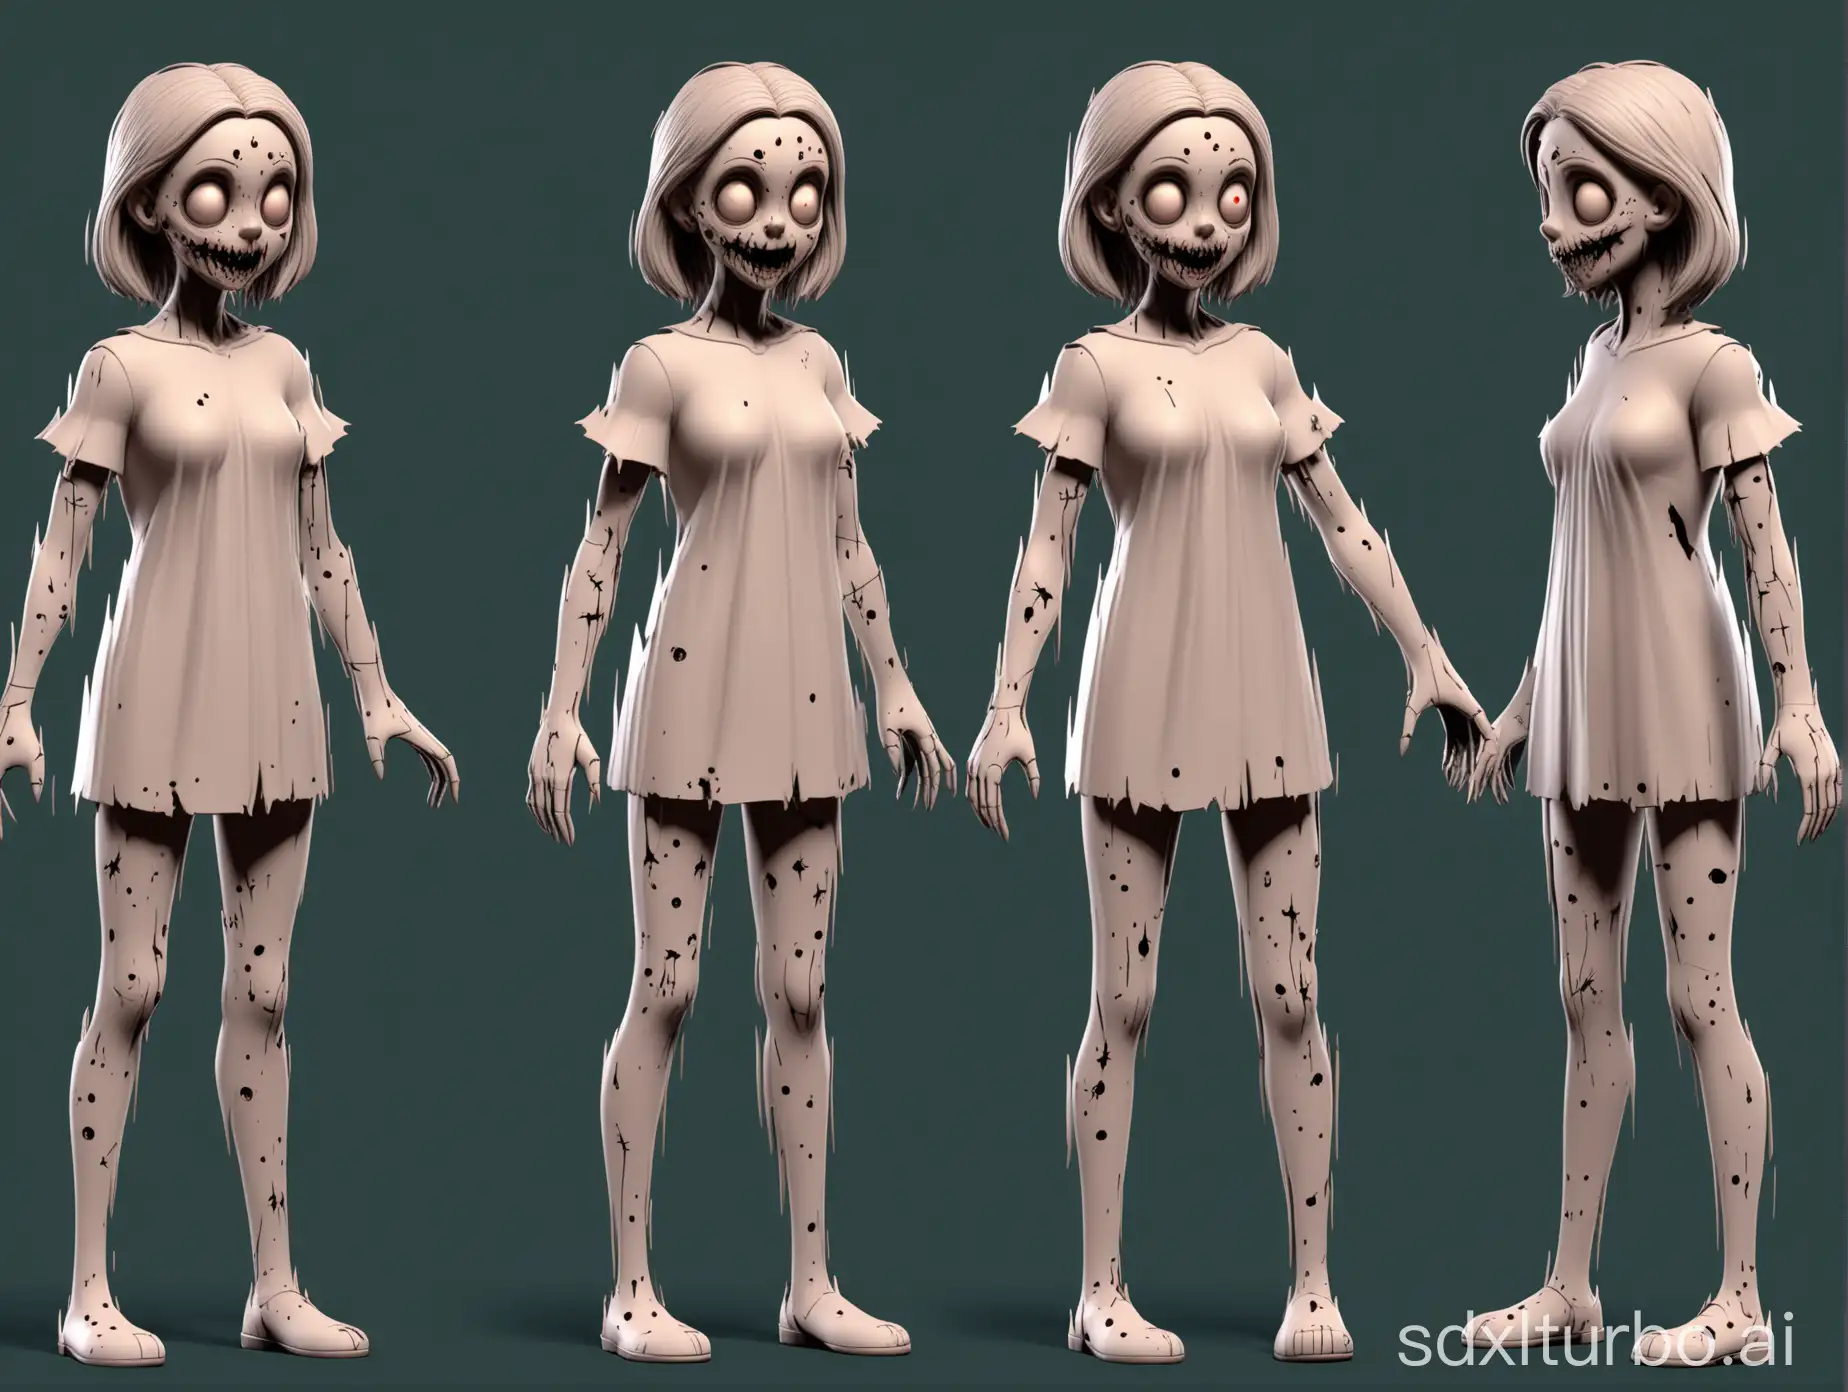 horror cute cartoon character sheet for 3d modelling, front and side view, a -pose, multiple views of the same character in front and side view